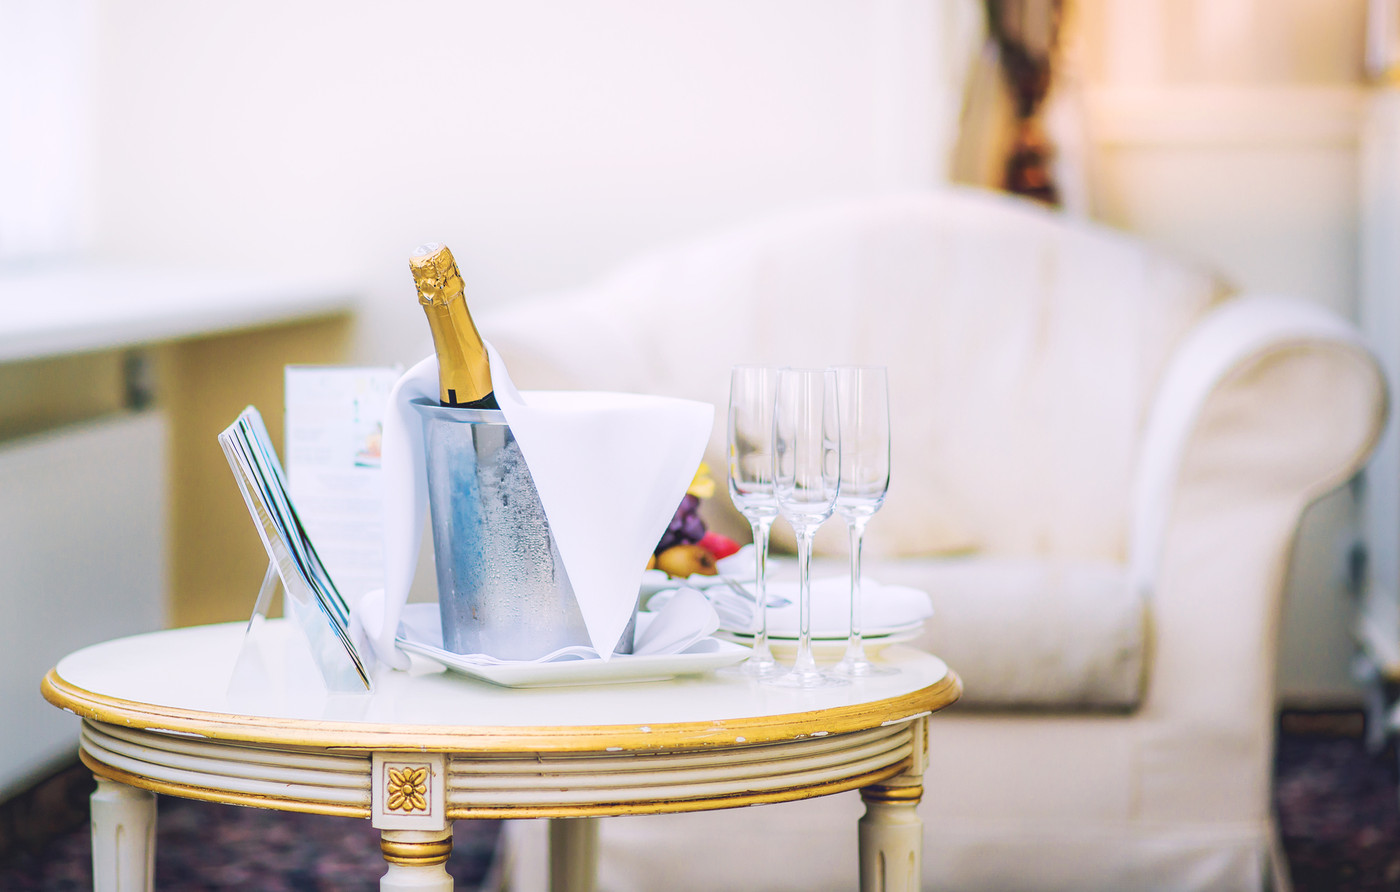 Bottle of champagne and glasses on a table in the hotel room